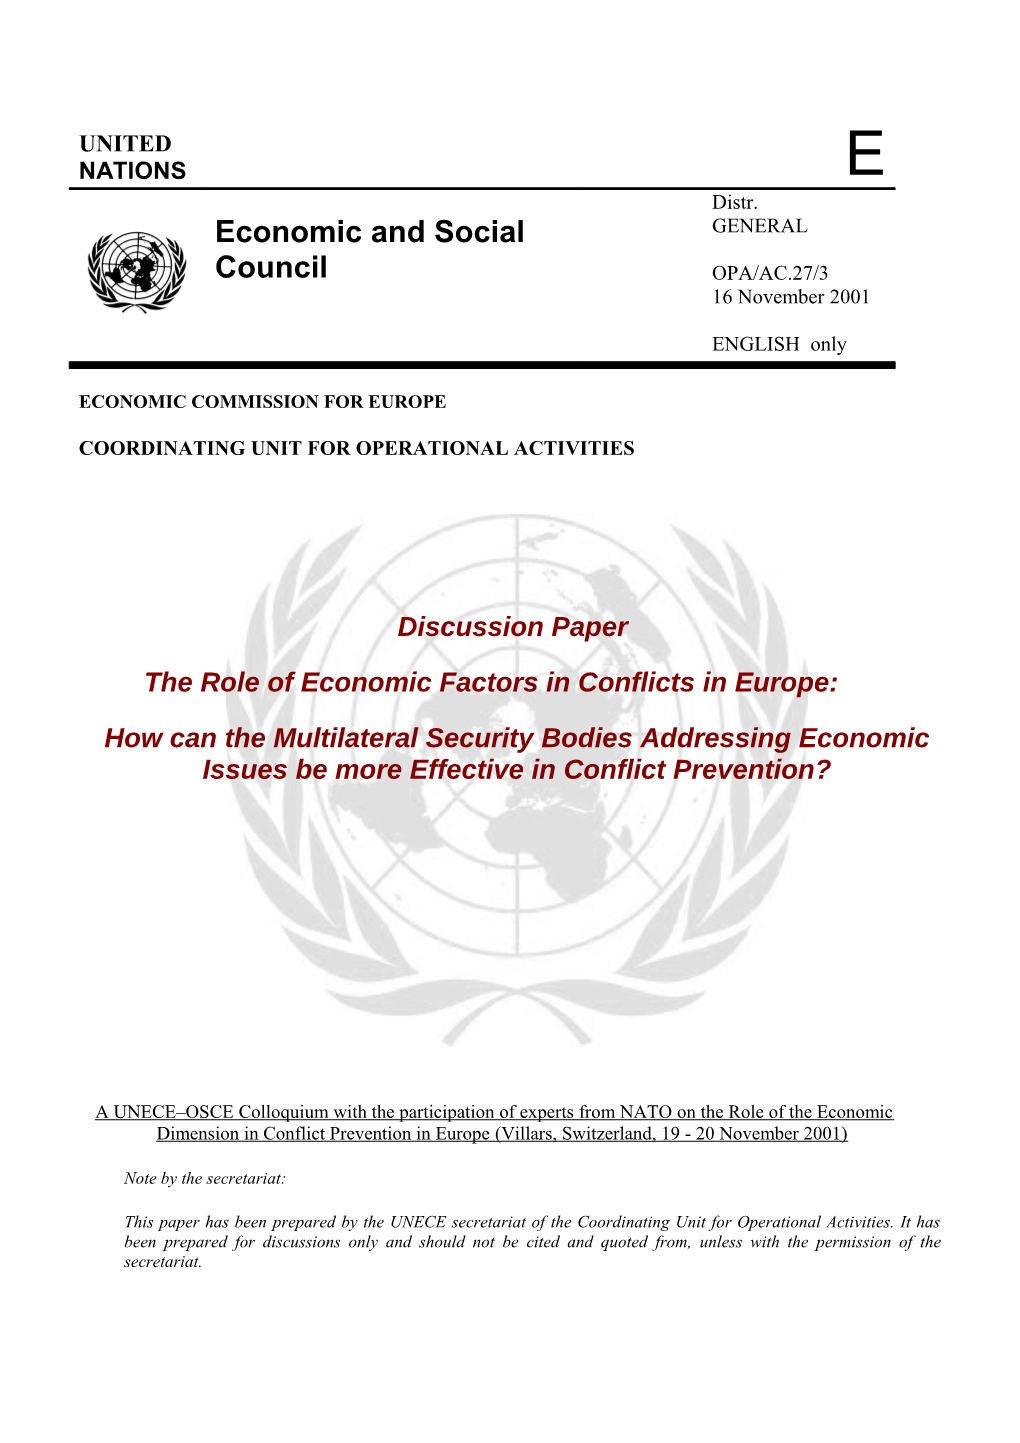 The Role of Conflict Prevention in the Economic Dimension